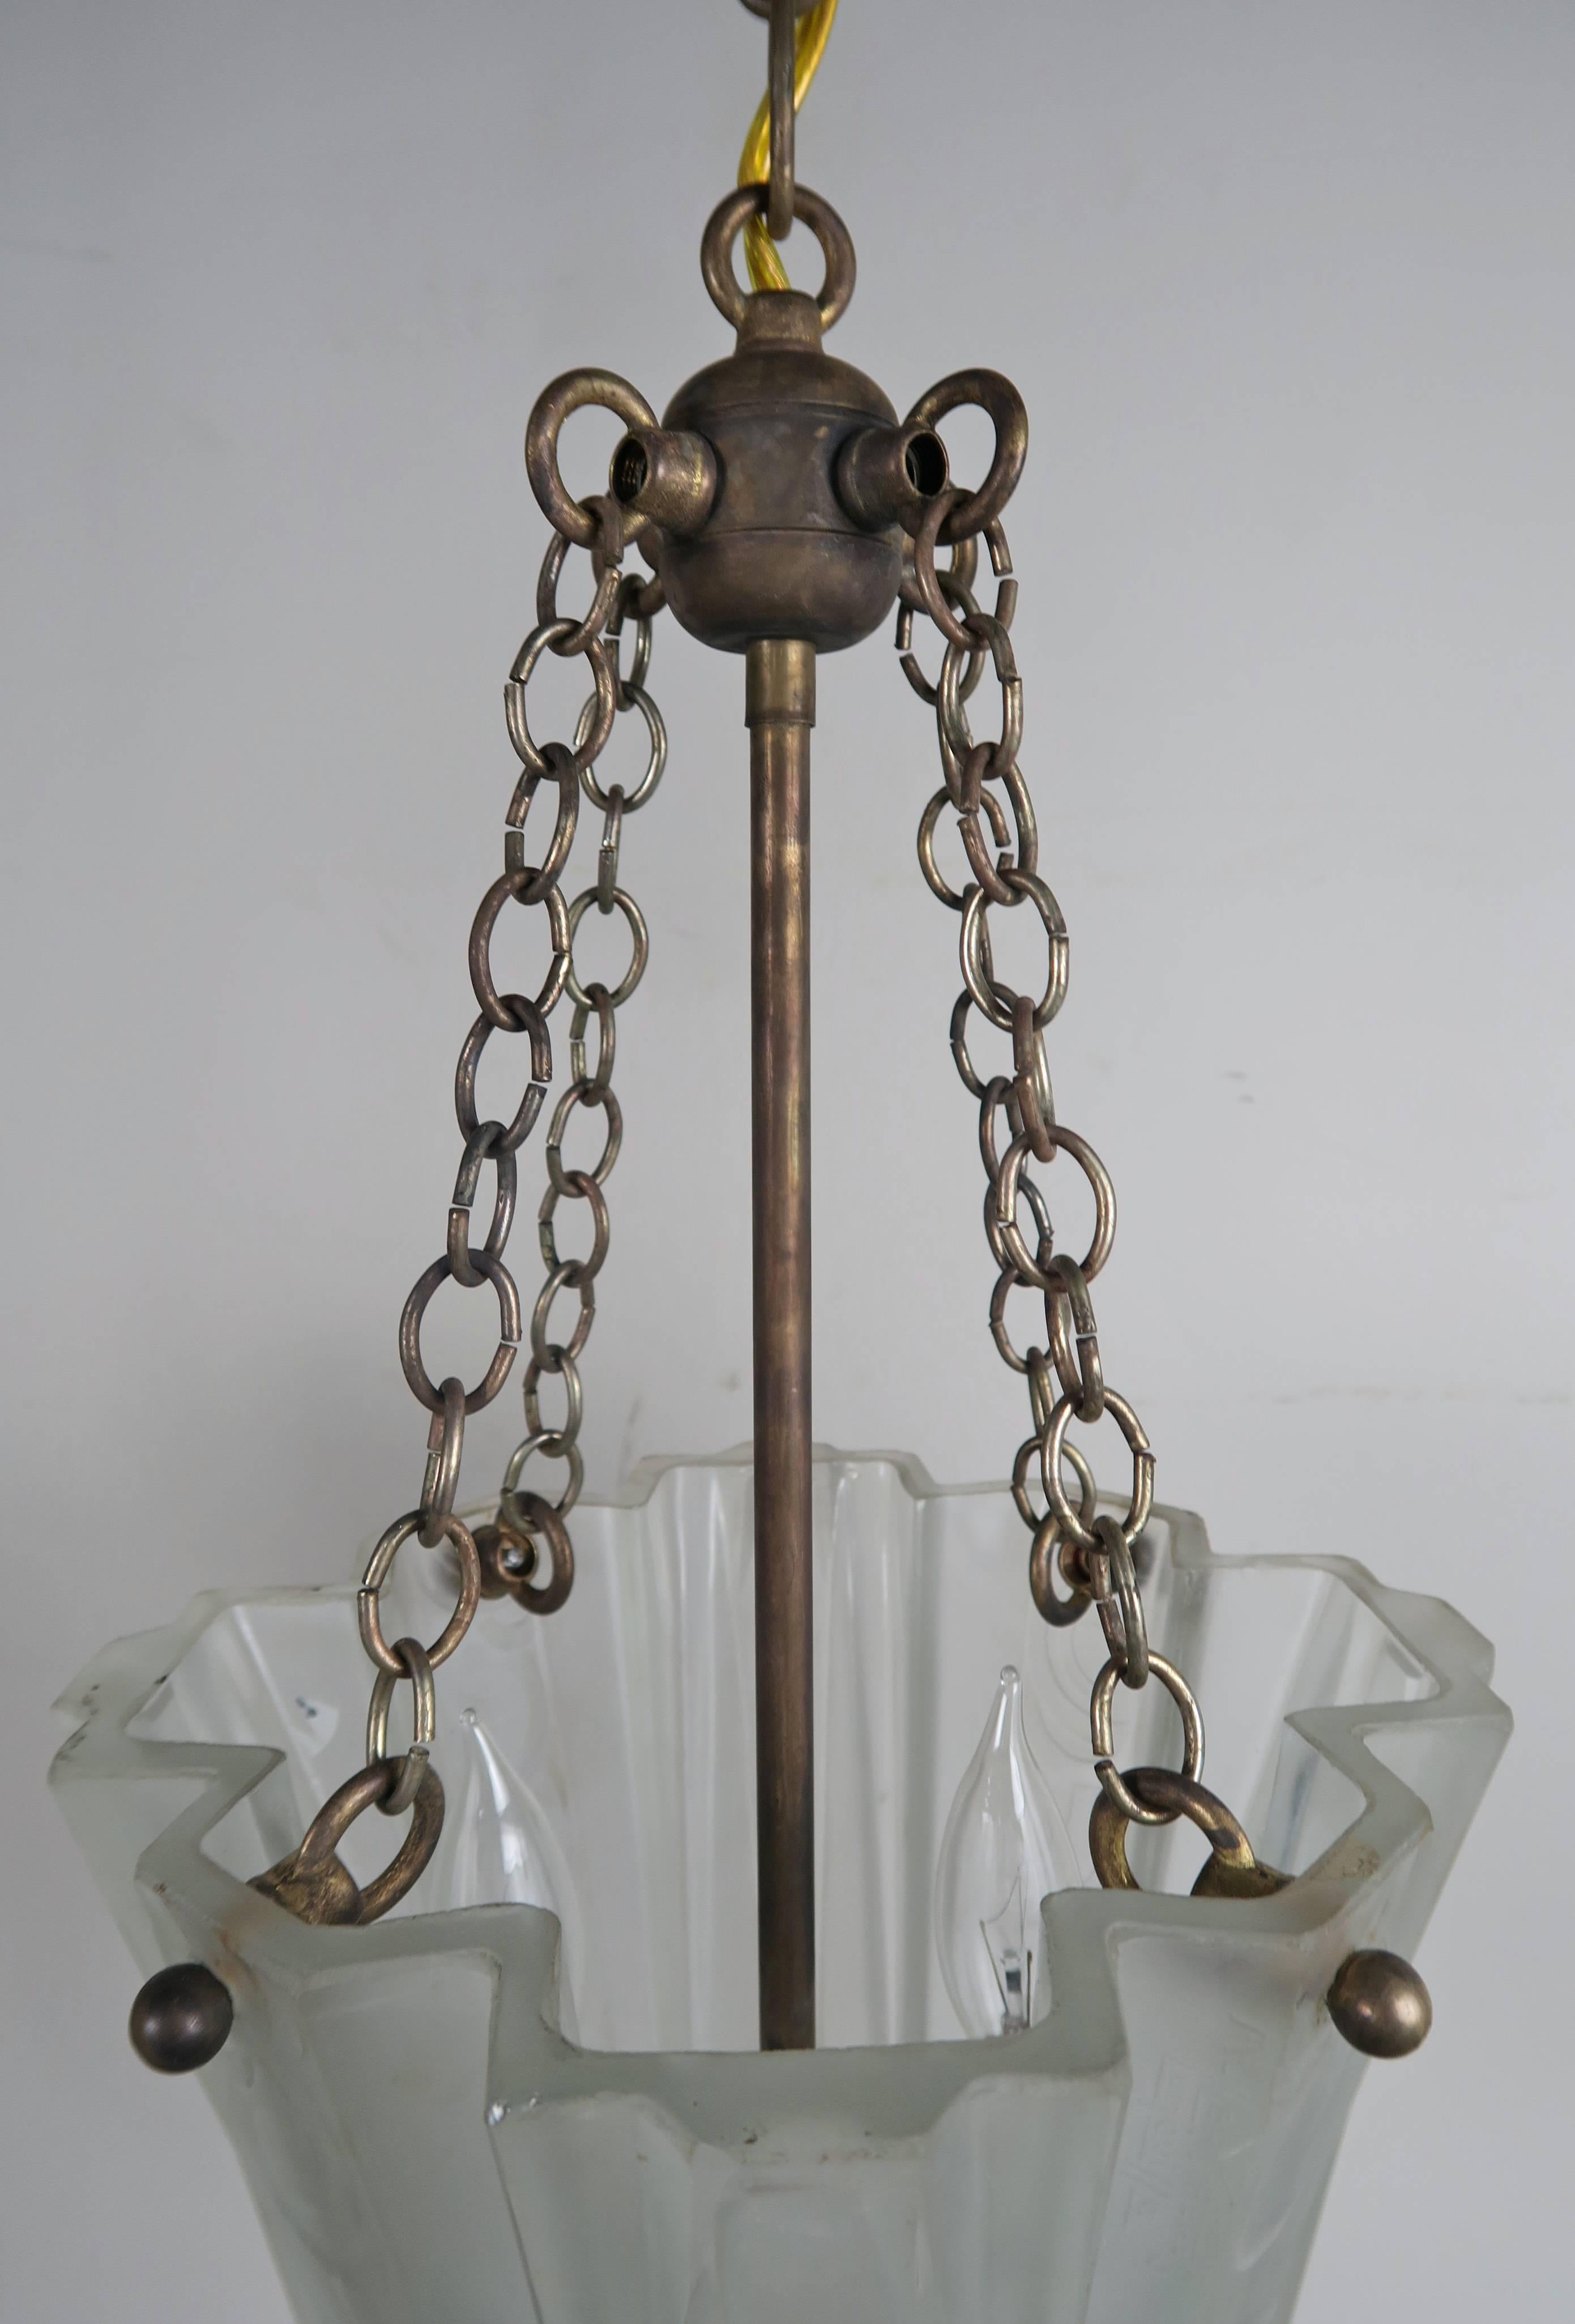 Offered by Melissa Levinson Antiques

Pair of Art Nouveau hanging light fixtures that hang from four chains connected to a brass ball. Two lights sit inside that can accommodate up to 50 watts in each fixture; thick etched and molded frosted glass.